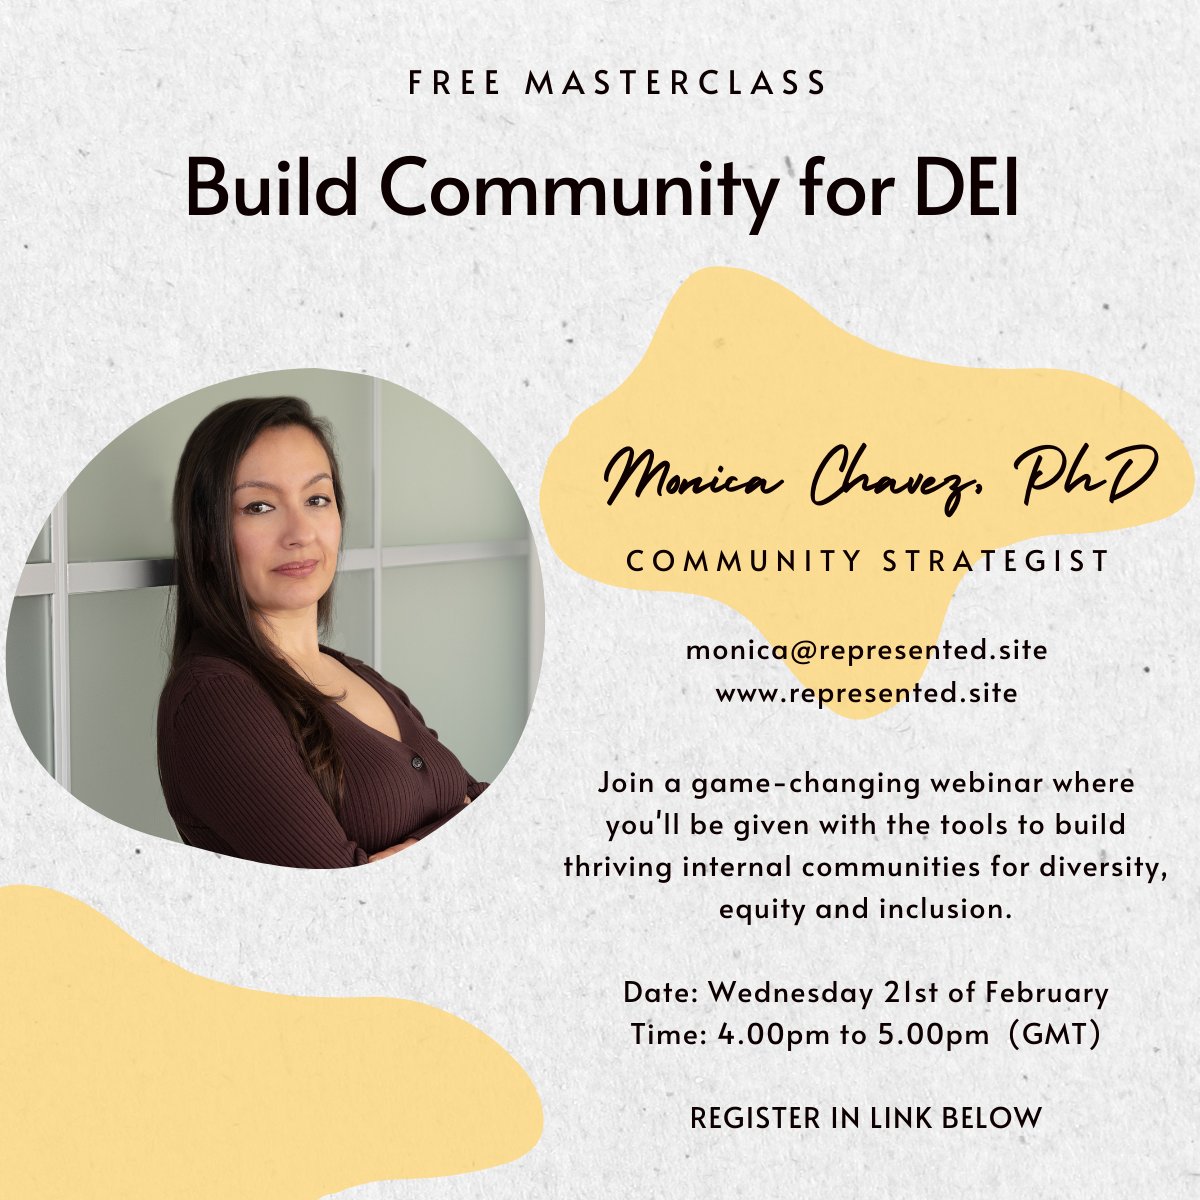 Sign up for my free masterclass to learn my signature method to build community into your organizations's EDI strategy welcoming-dew-83380.myflodesk.com/jfzlimzfxd